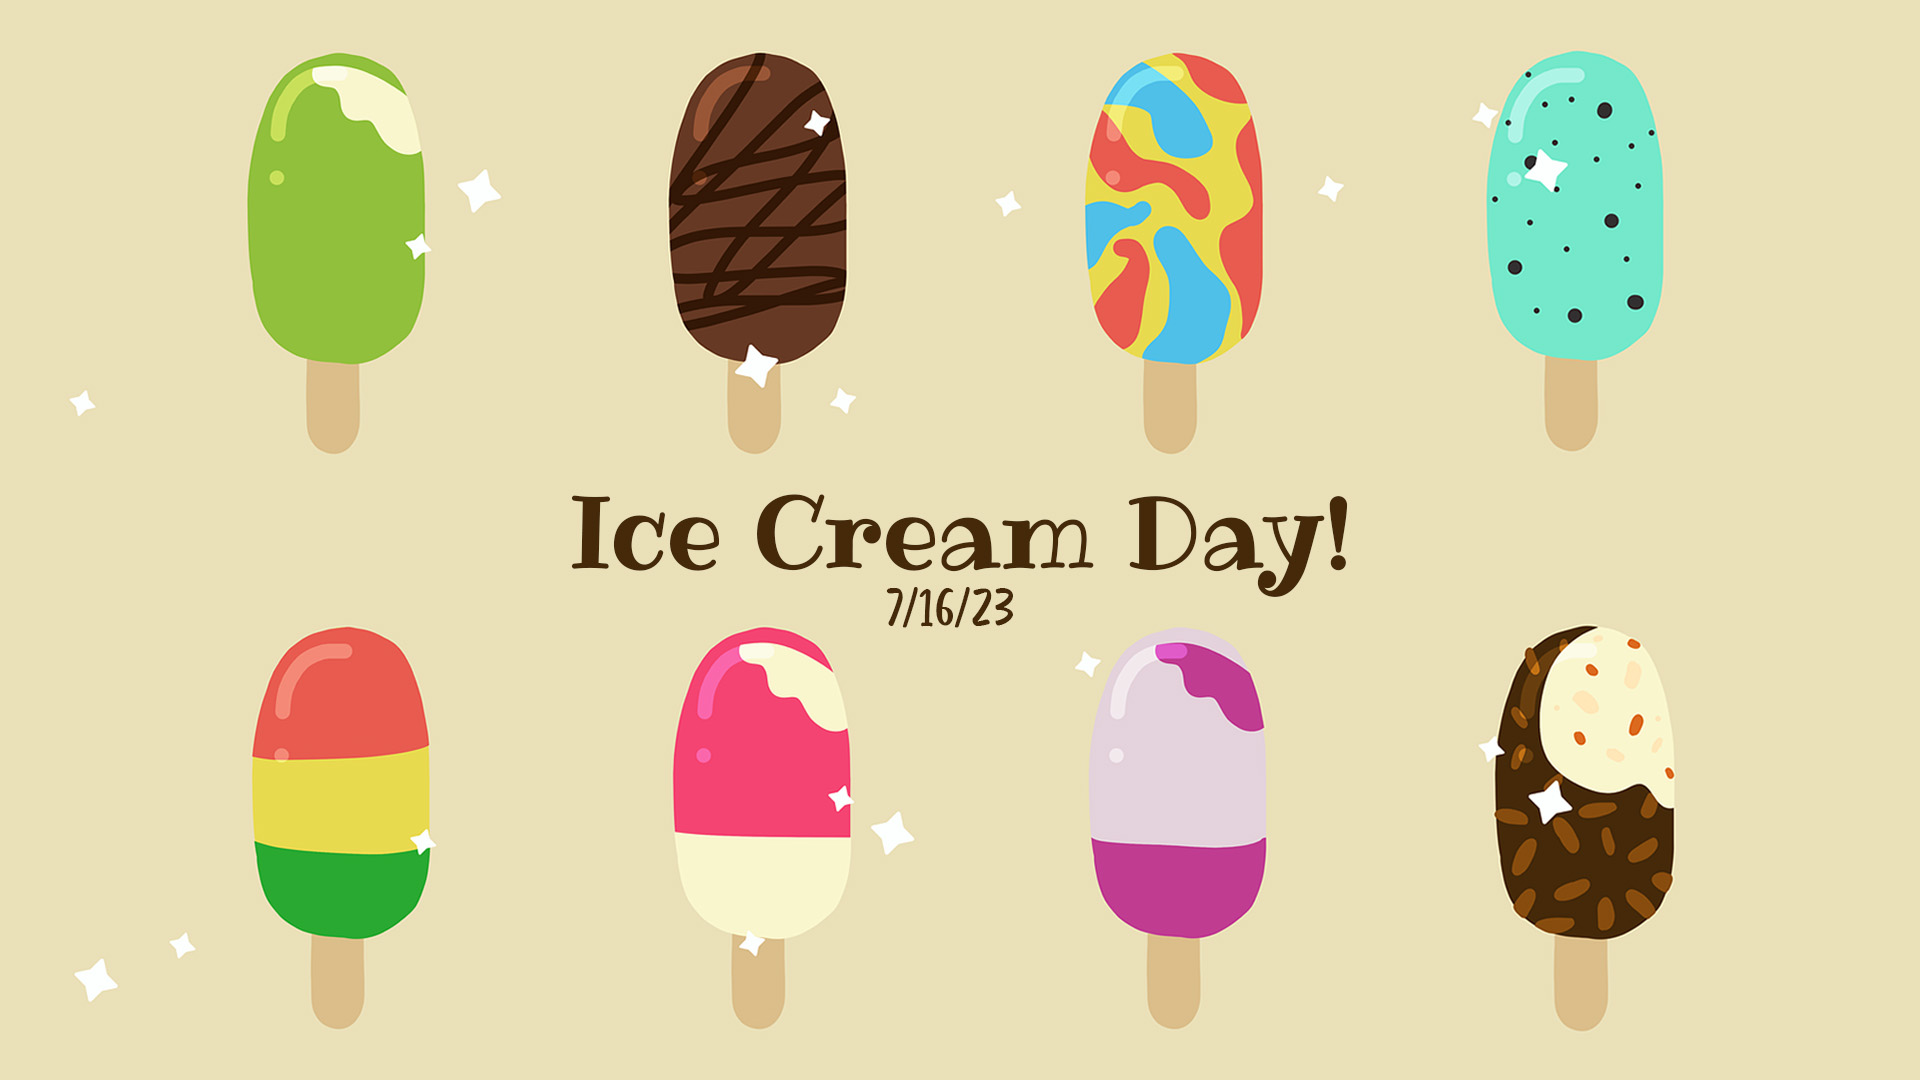 Tan background with 4 columns and 2 rows of ice cream treats on a stick. They are multi colored and have white illustrated stars spread across the graphic. Ice Cream Day is written in the center of the image in a playful dark brown handwritten font. Below it reads 7/16/23 in a dark brown font.